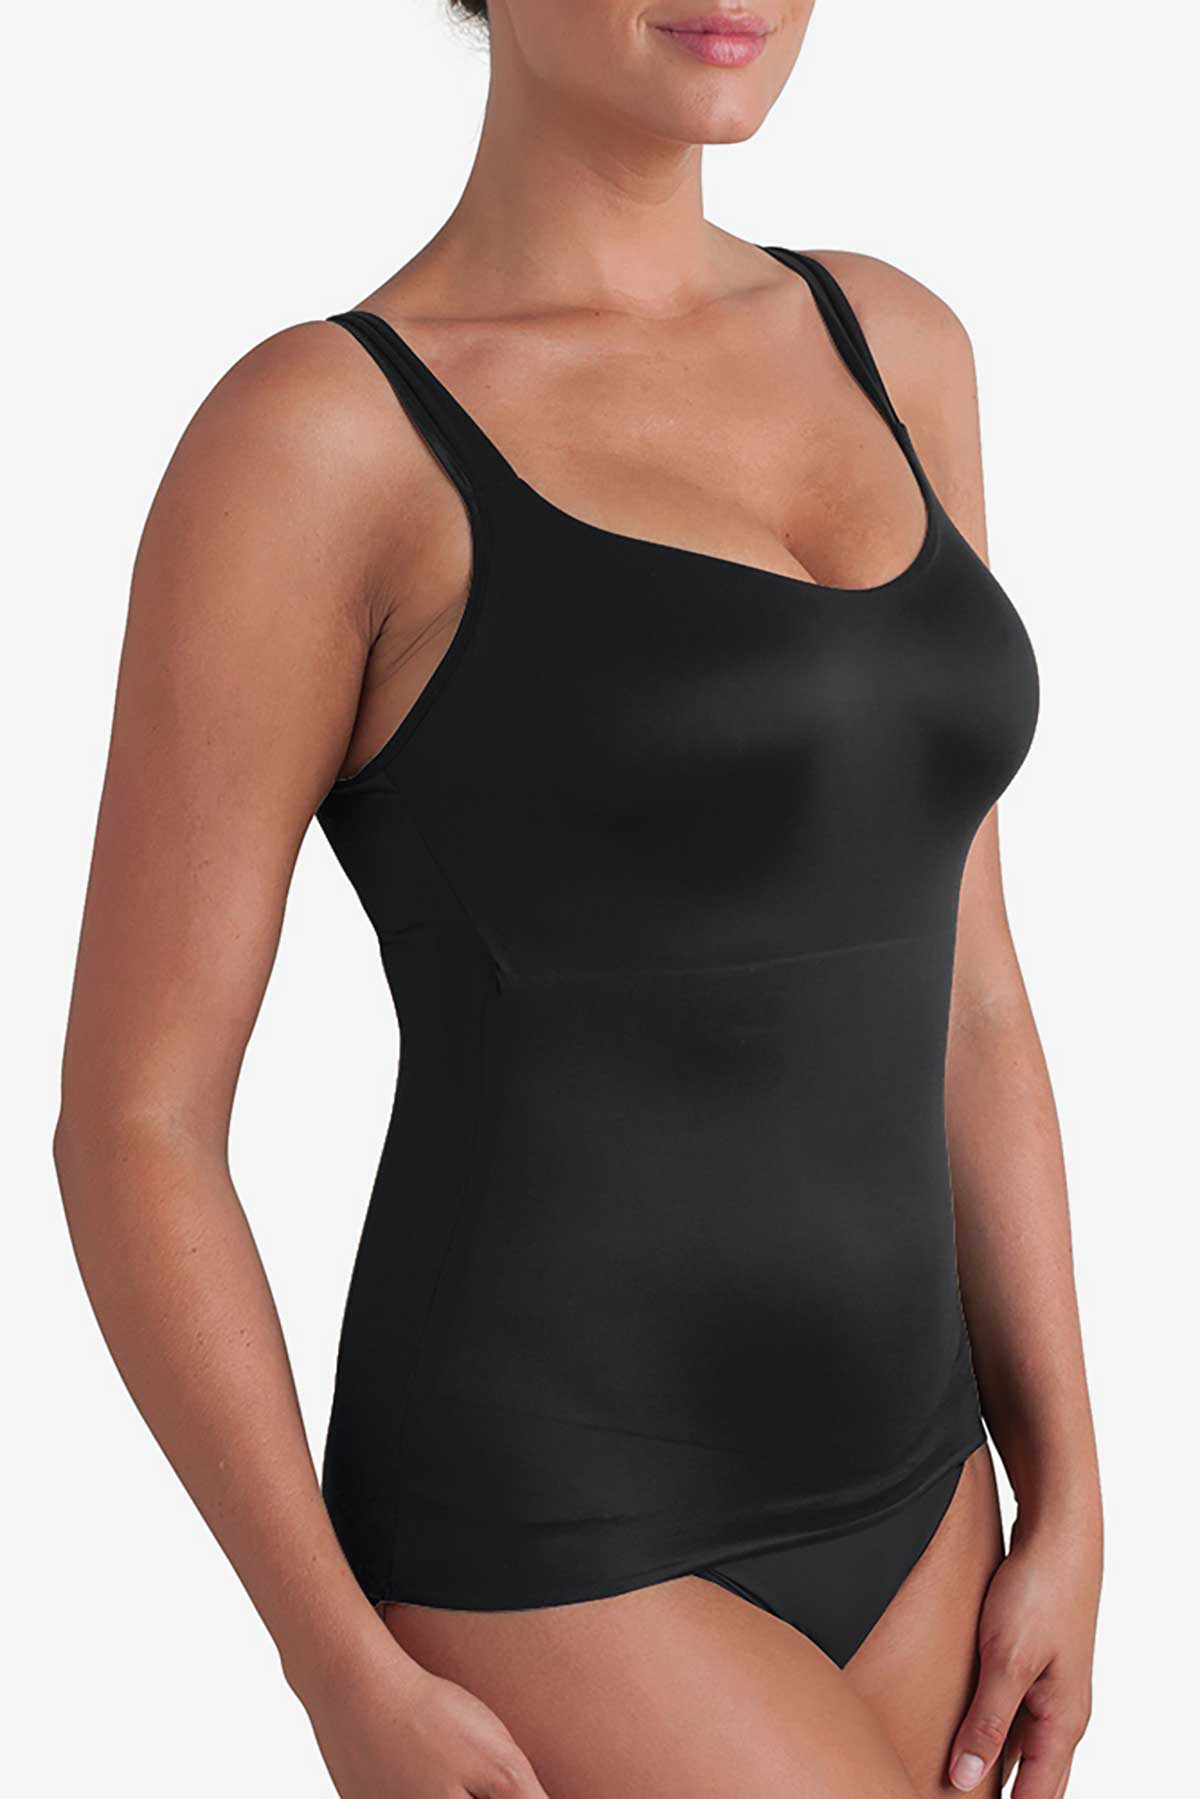 Buy Black Firm Tummy Control Wear Your Own Bra Slip from Next Hungary